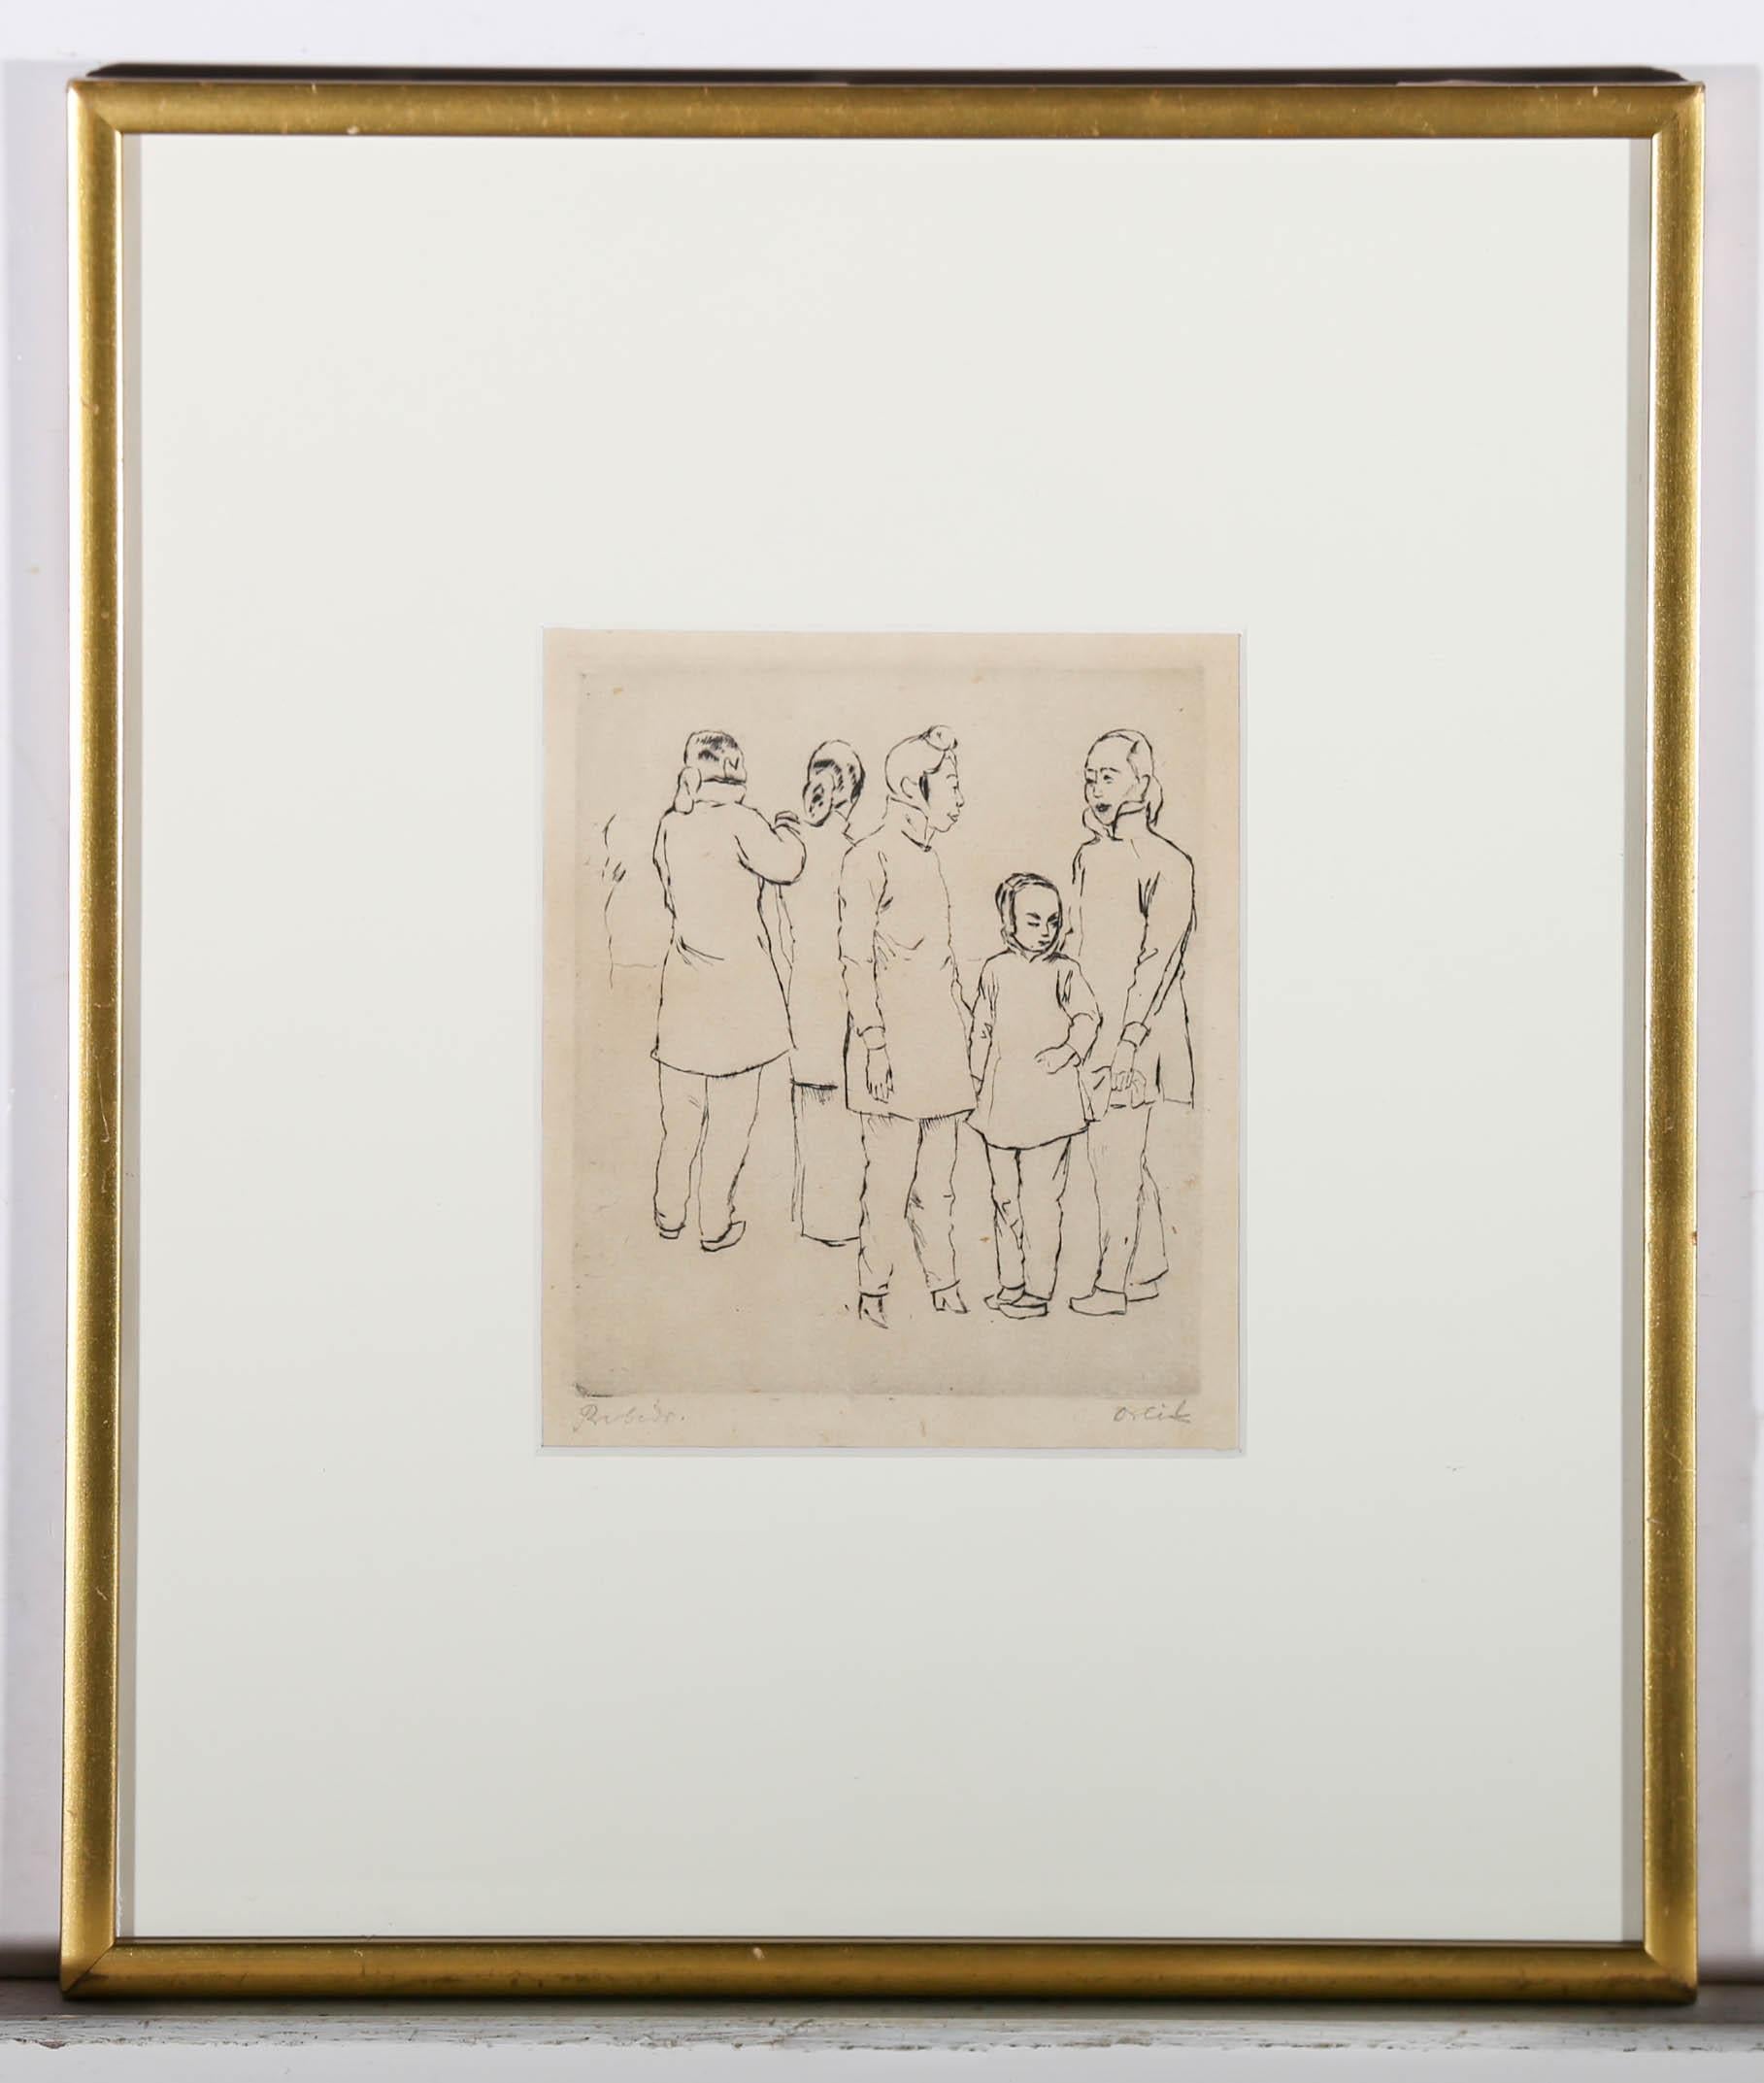 A charming etching by 19th century artist Emil Orlik. Etched in Orlik's signature minimalist style, the group of figures appear to be in conversation. Signed in graphite below the plate lines. Well presented in a gilt frame and white card mount. On